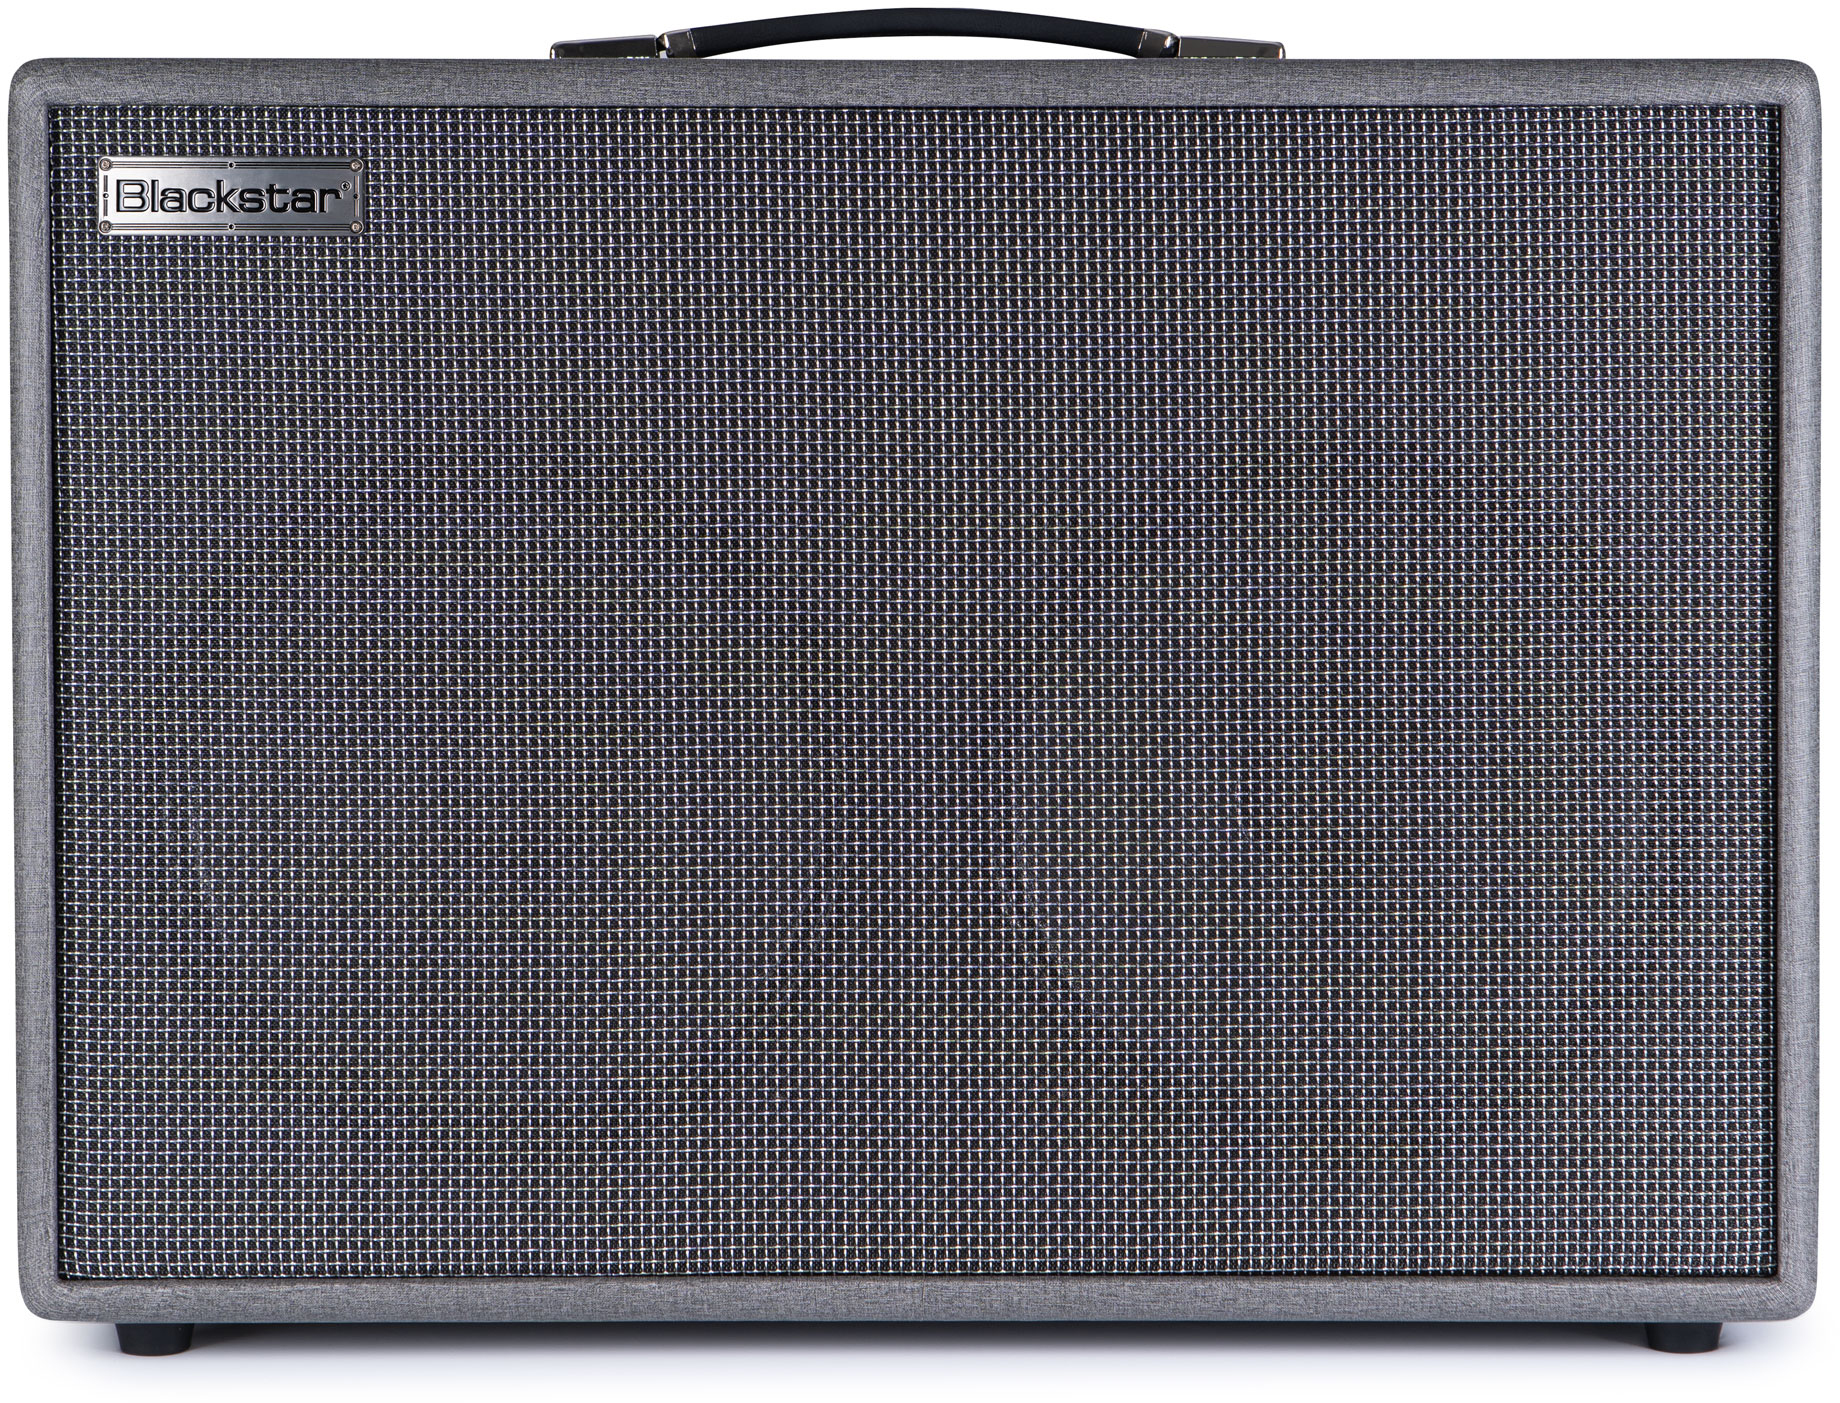 Blackstar Silverline Stereo Deluxe 2x100w 2x12 - Electric guitar combo amp - Variation 1